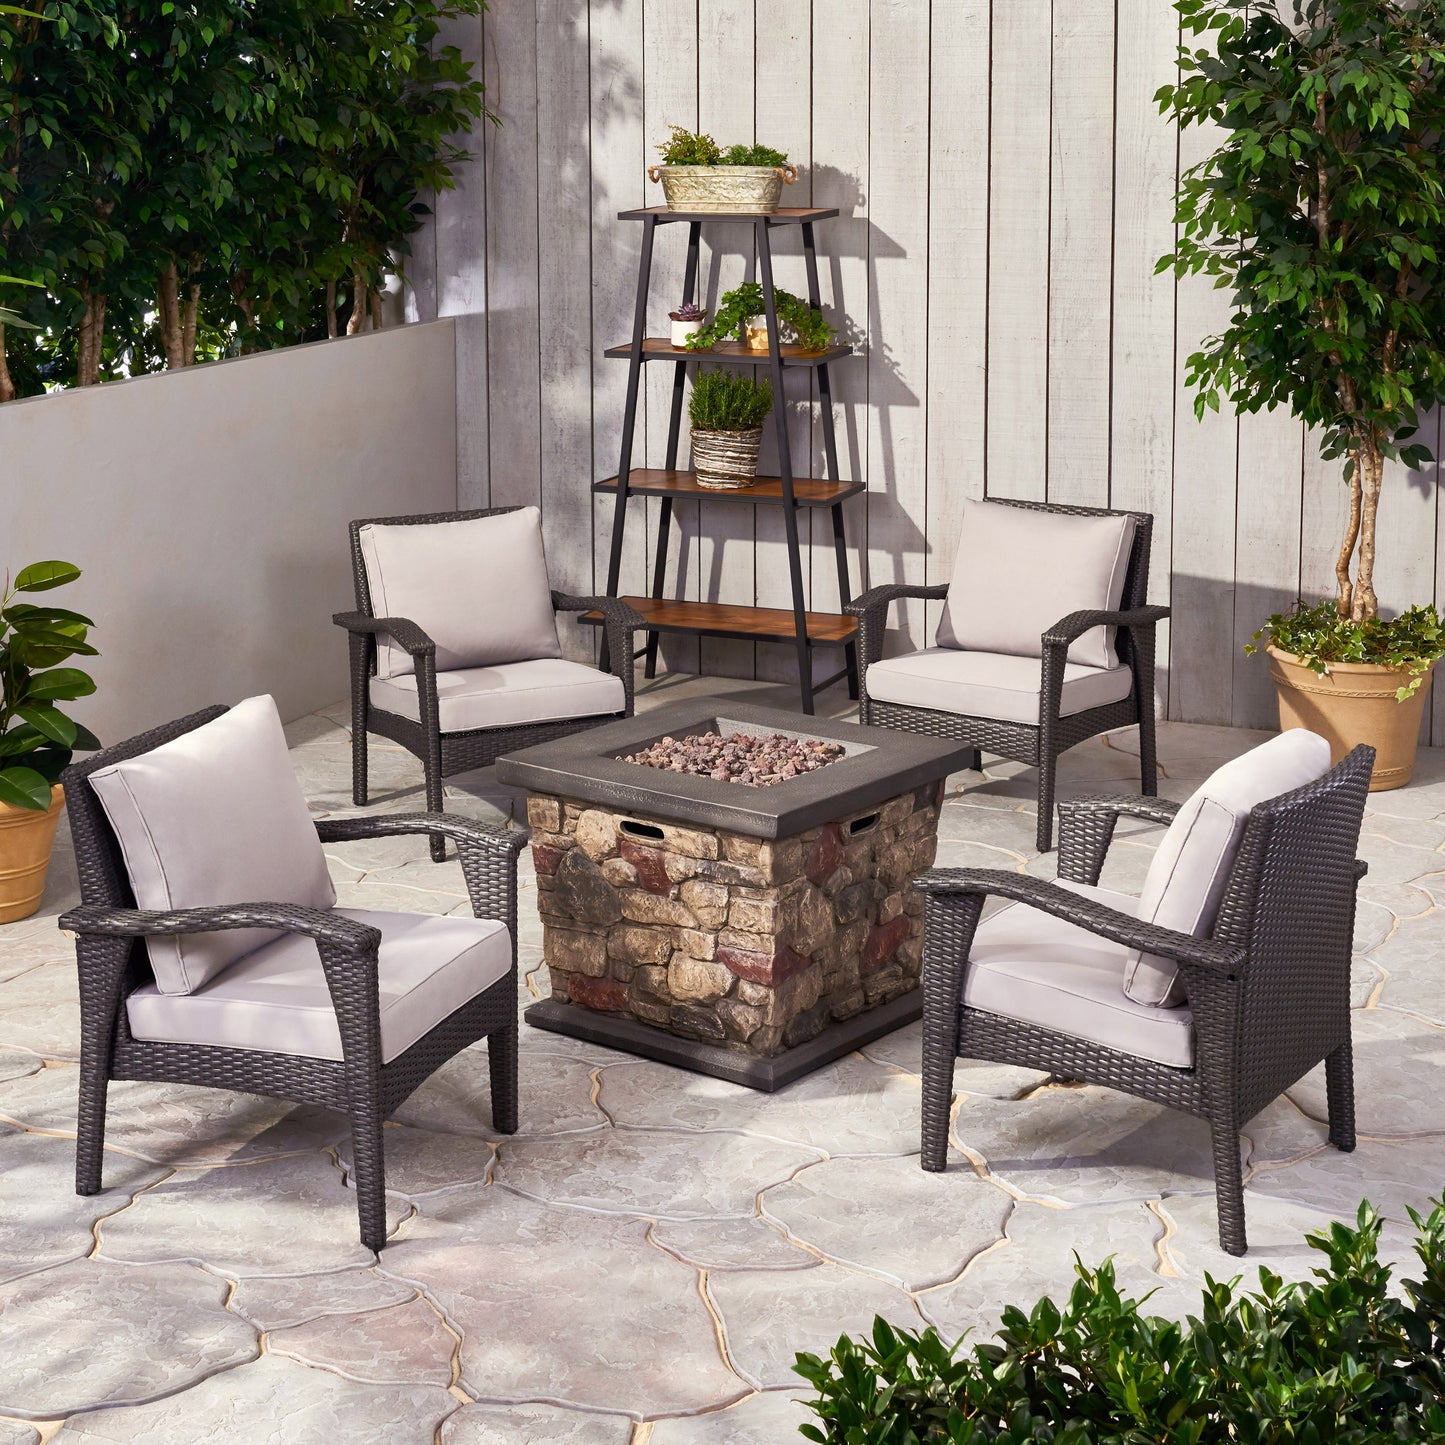 Ella Outdoor 4 Club Chair Chat Set with Fire Pit